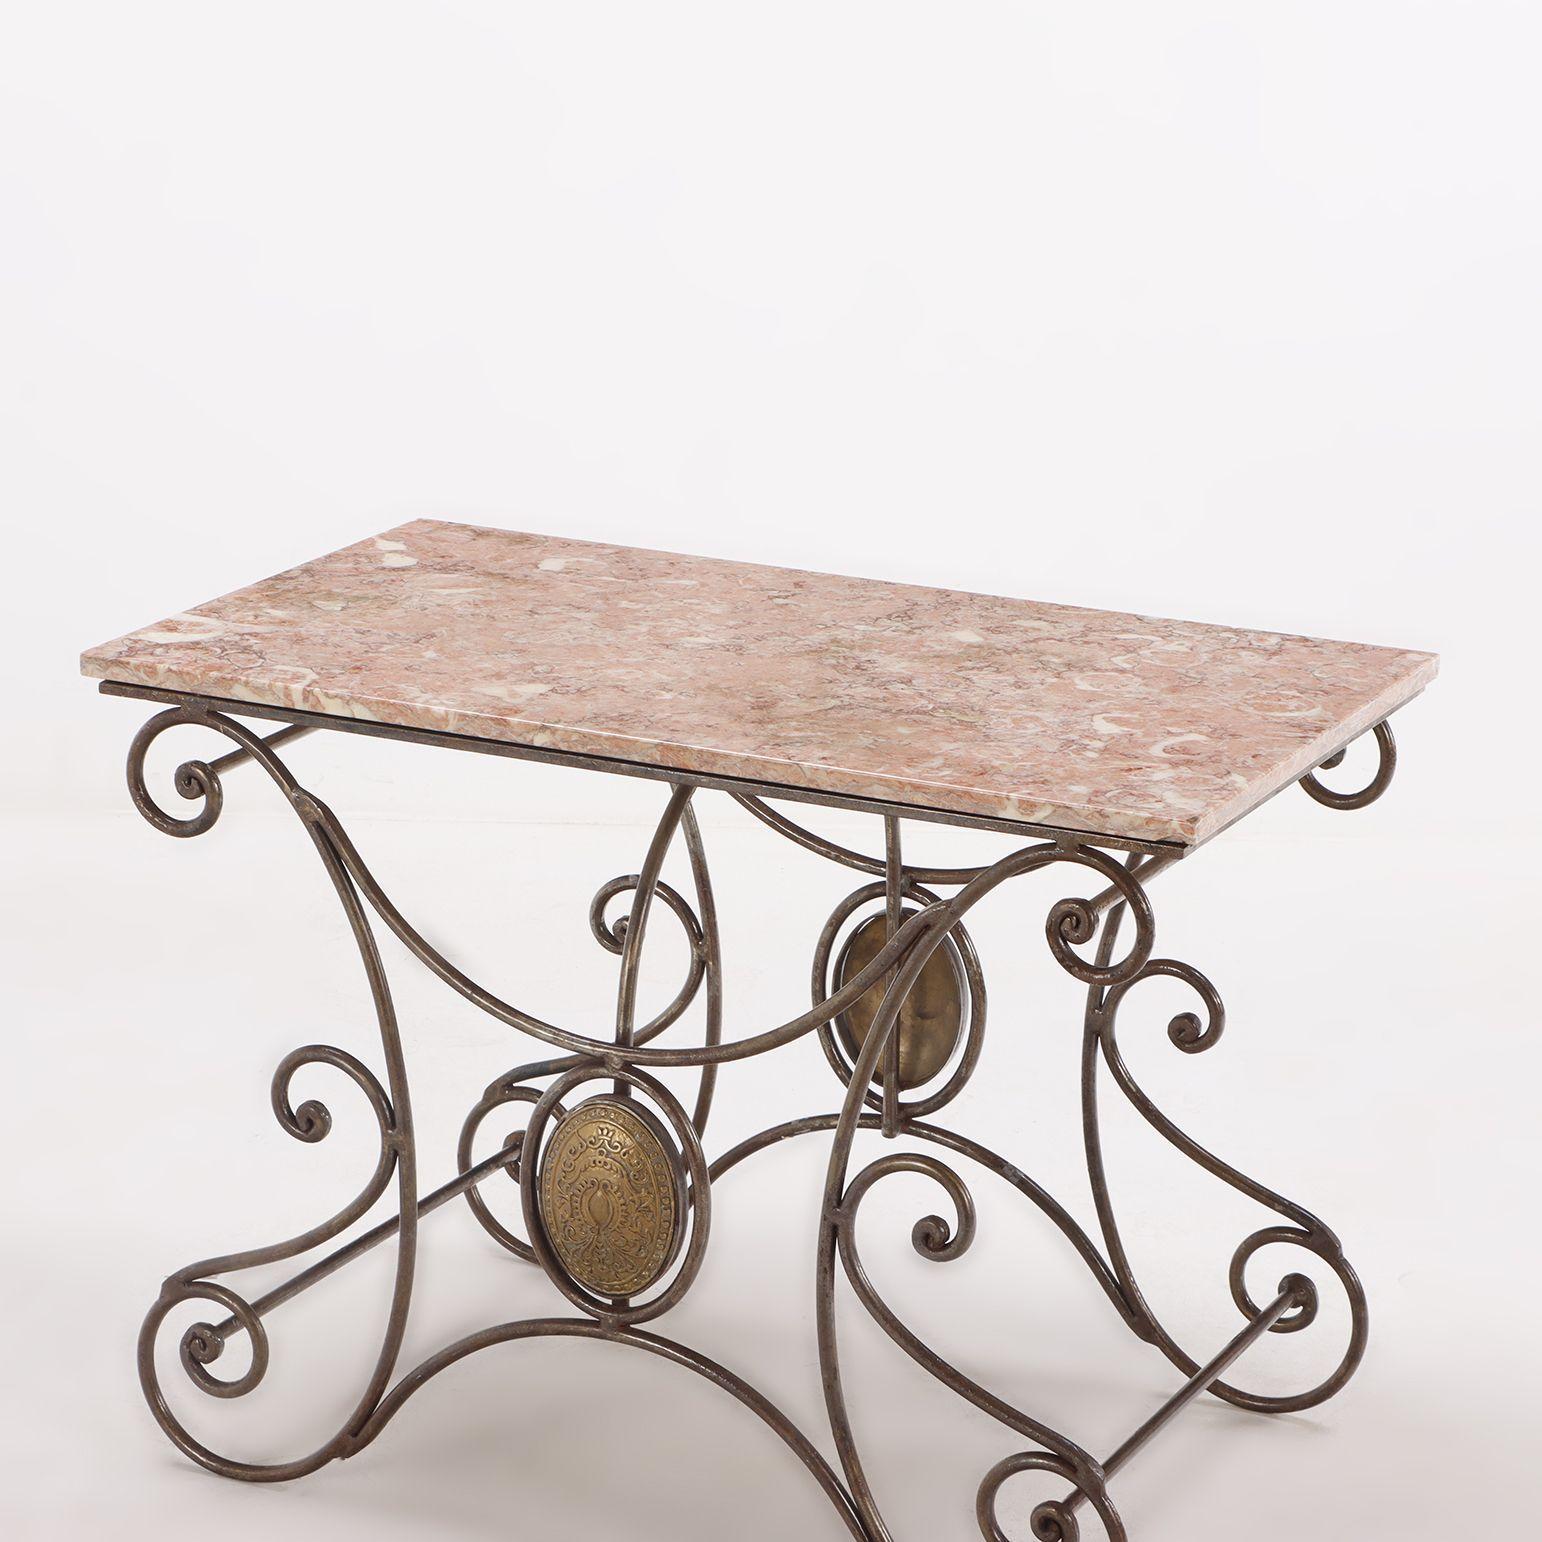 19th Century French Provincial Butchers Table. Made of decoratively scrolled steel legs with brass accents and the original marble top. Made in central France circa 1860.